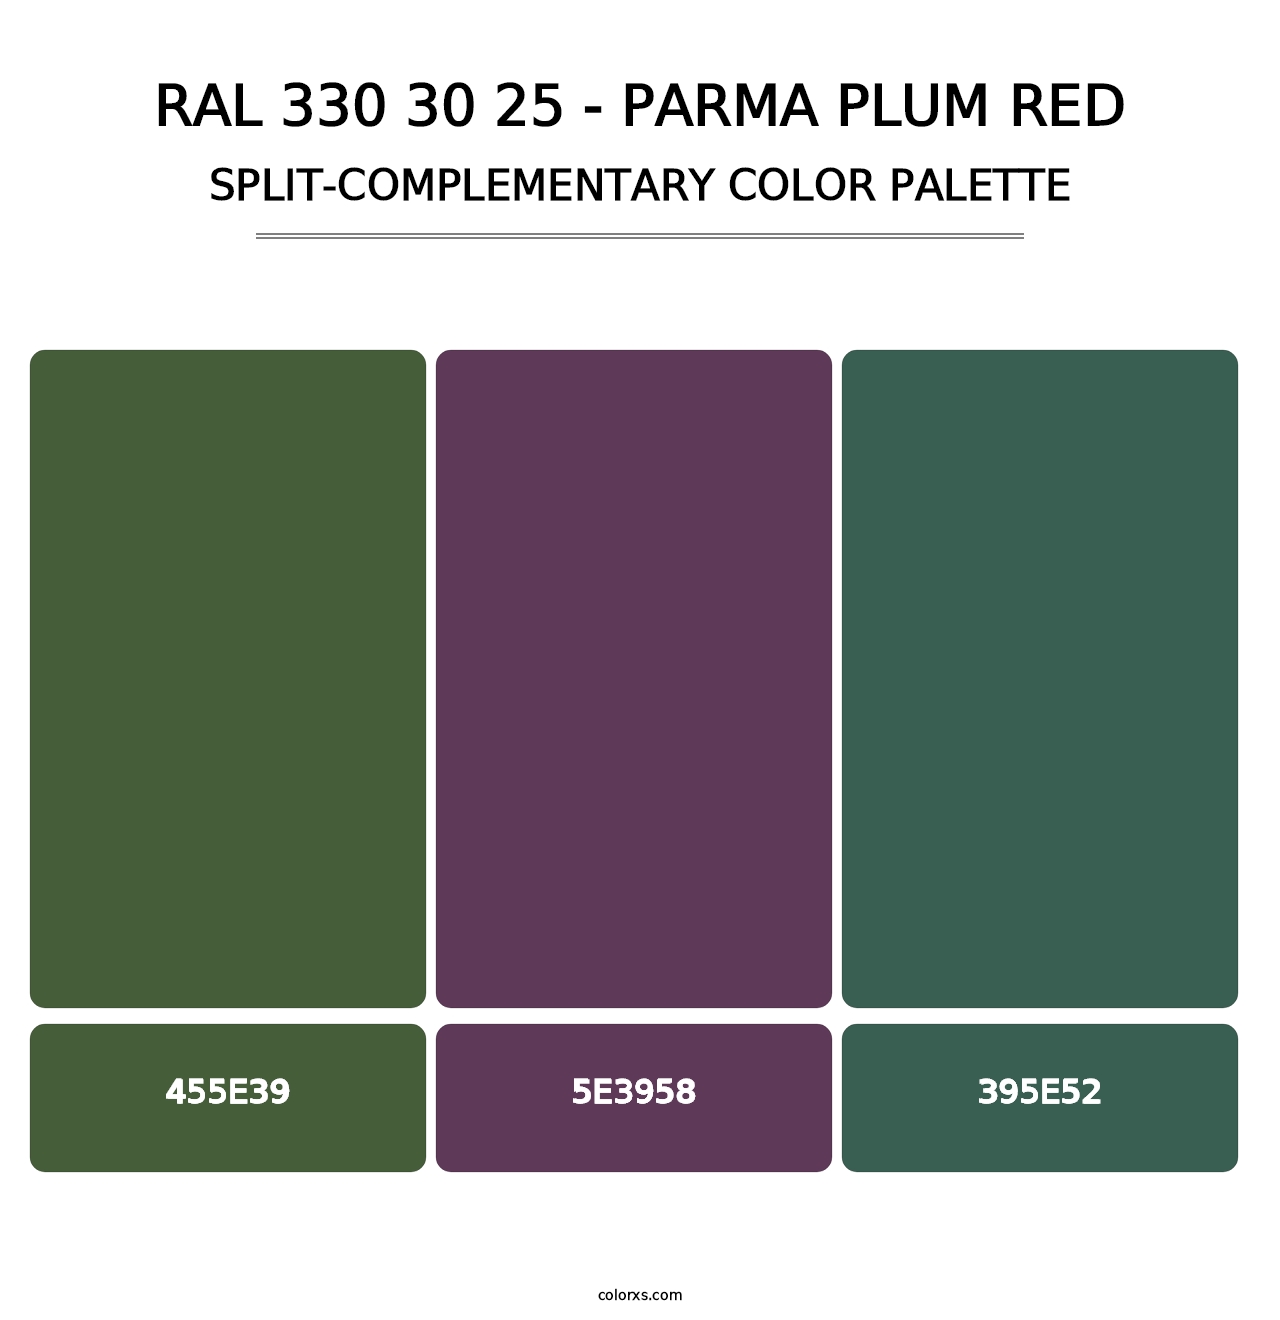 RAL 330 30 25 - Parma Plum Red - Split-Complementary Color Palette